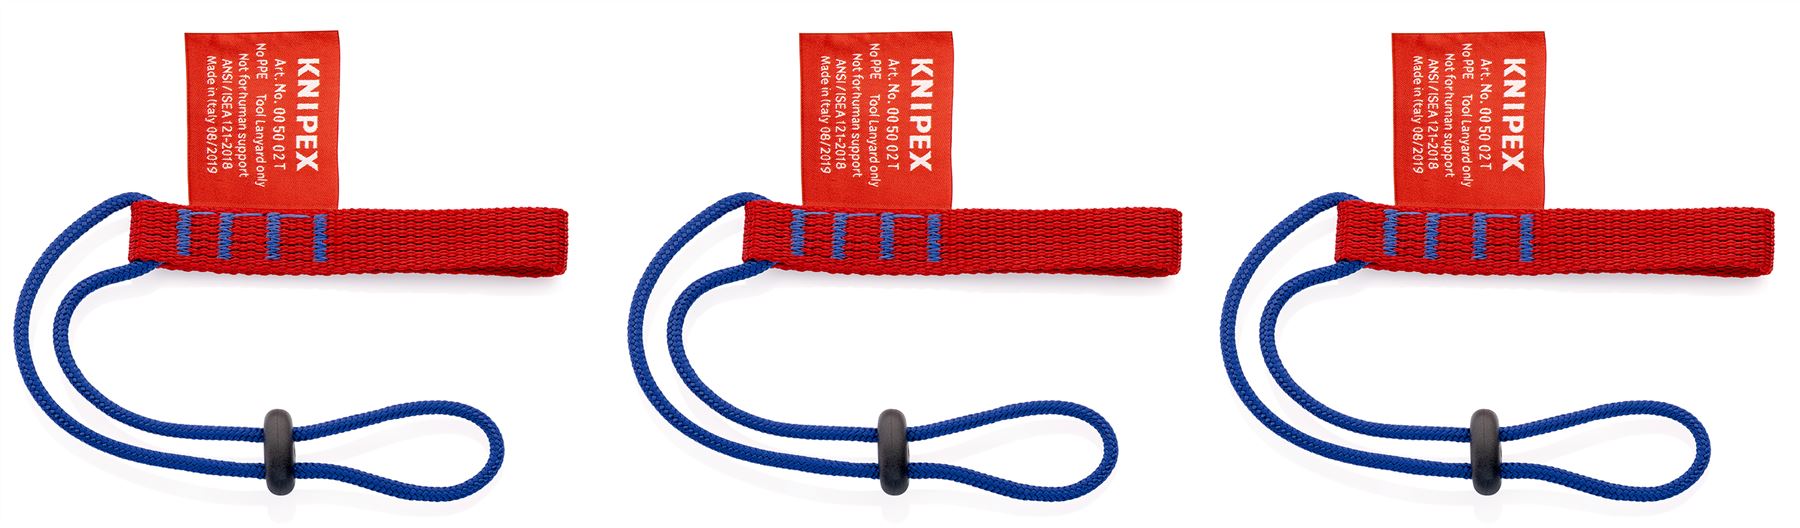 Knipex Tool Tether Adapter Strap 3 Pack Working at Height 1.5kg Max Load 00 50 02 T BK